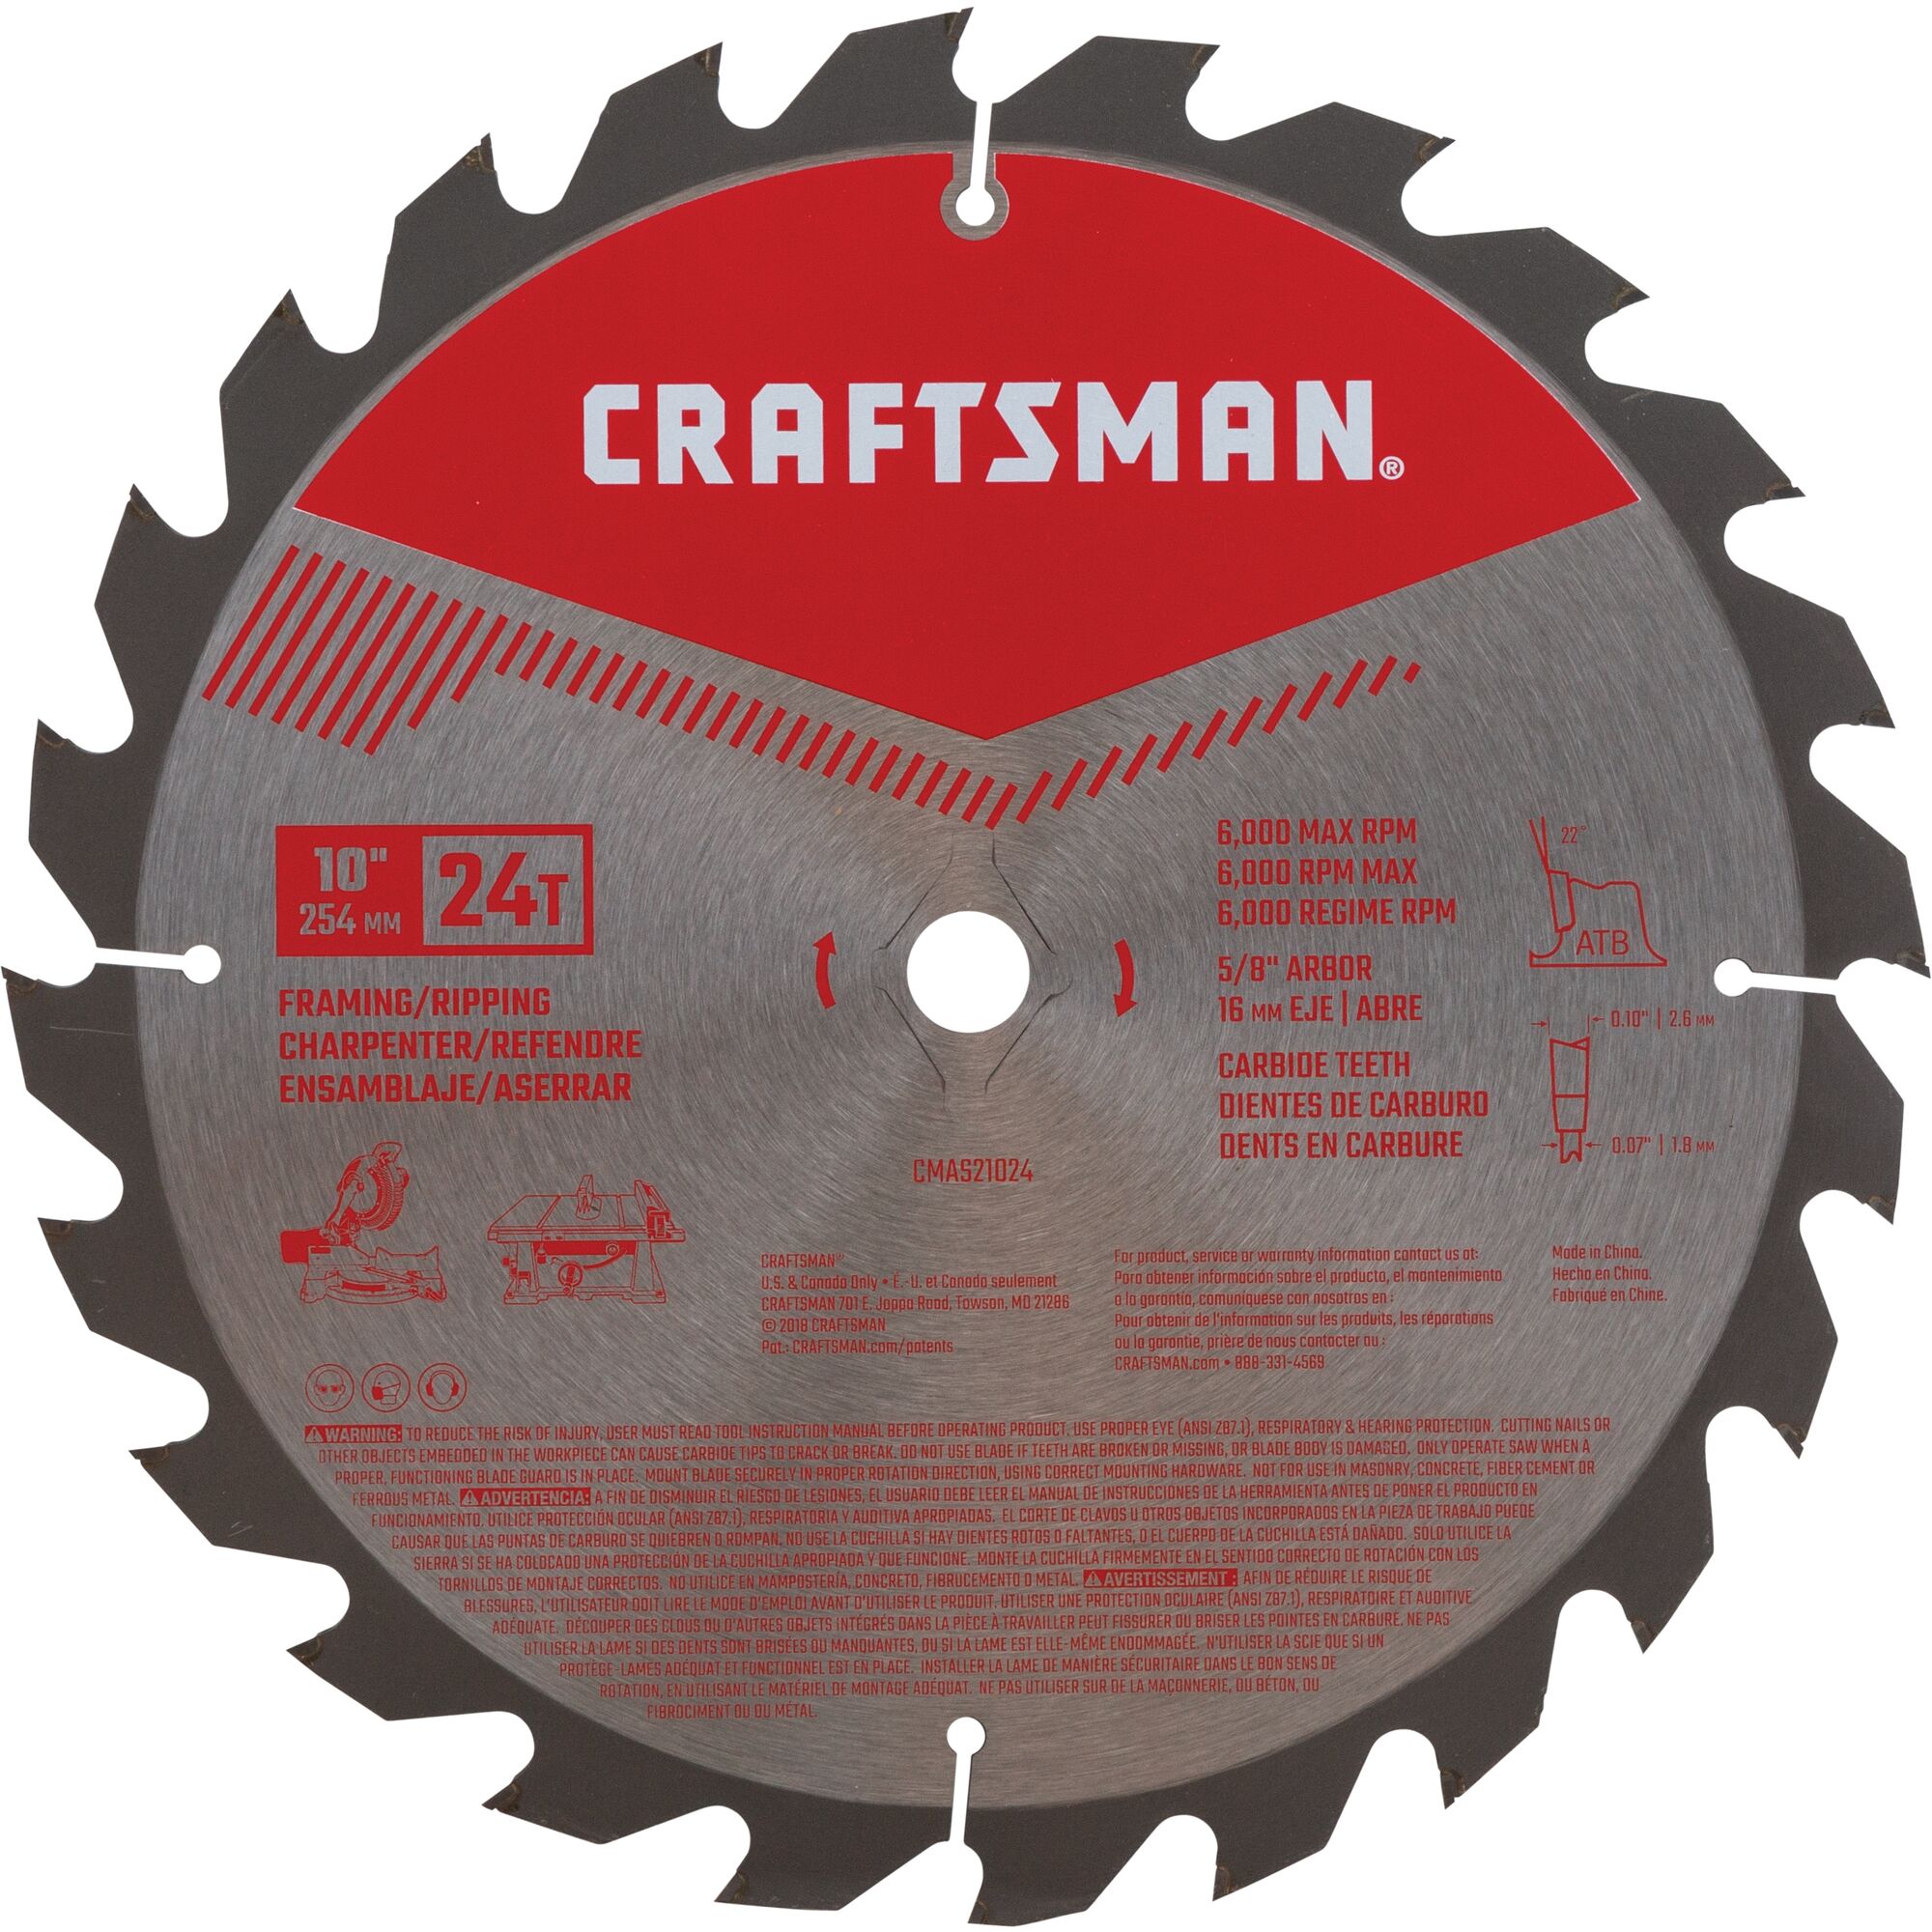 10 inch 24 tooth framing ripping saw blade.